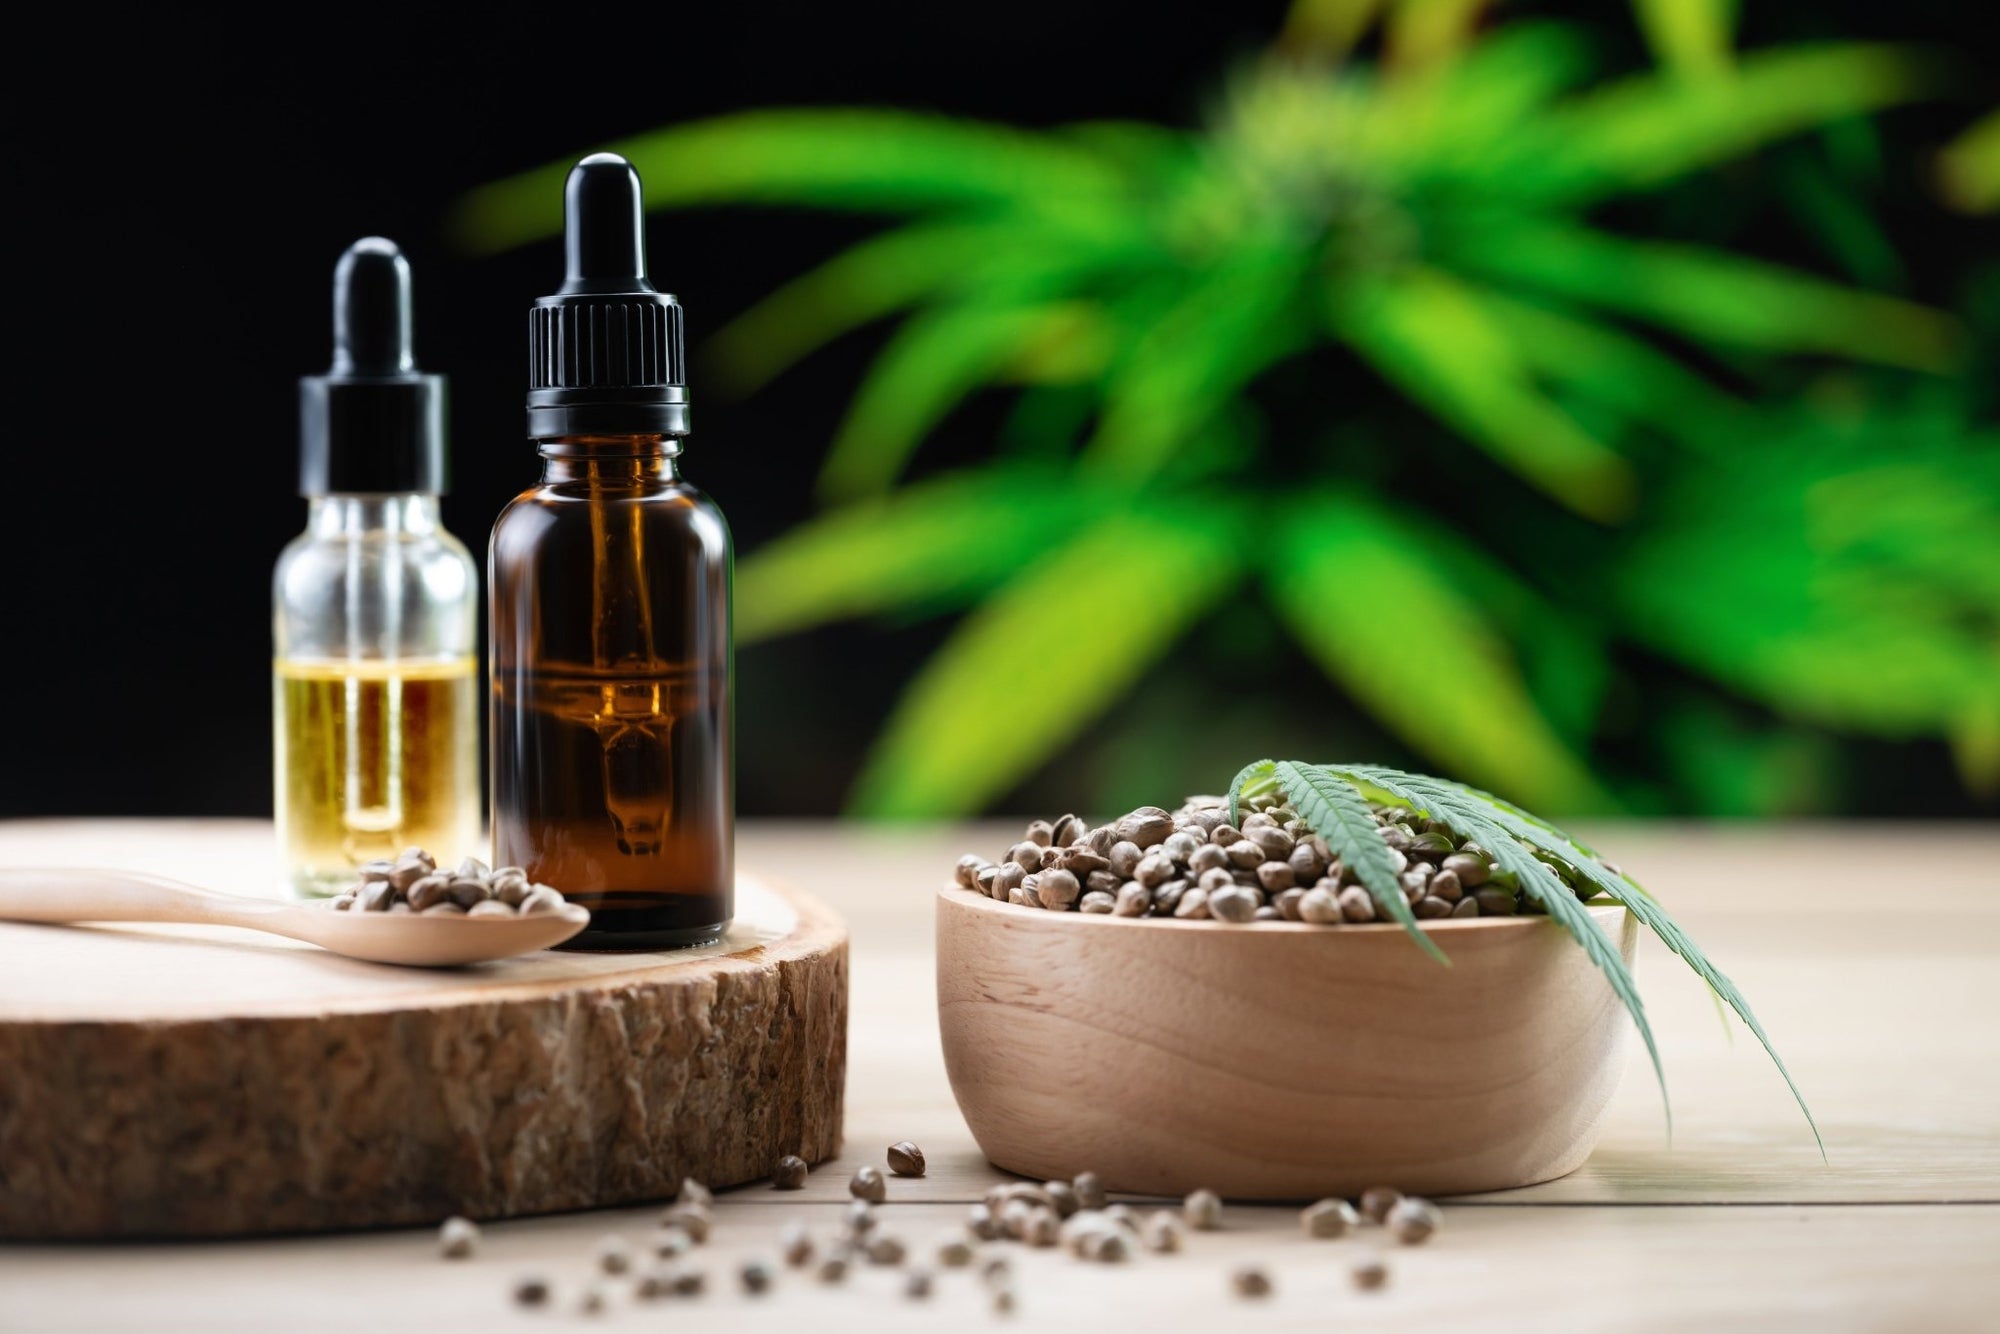 Where to buy CBD oil for cats? - My Blissful Pet